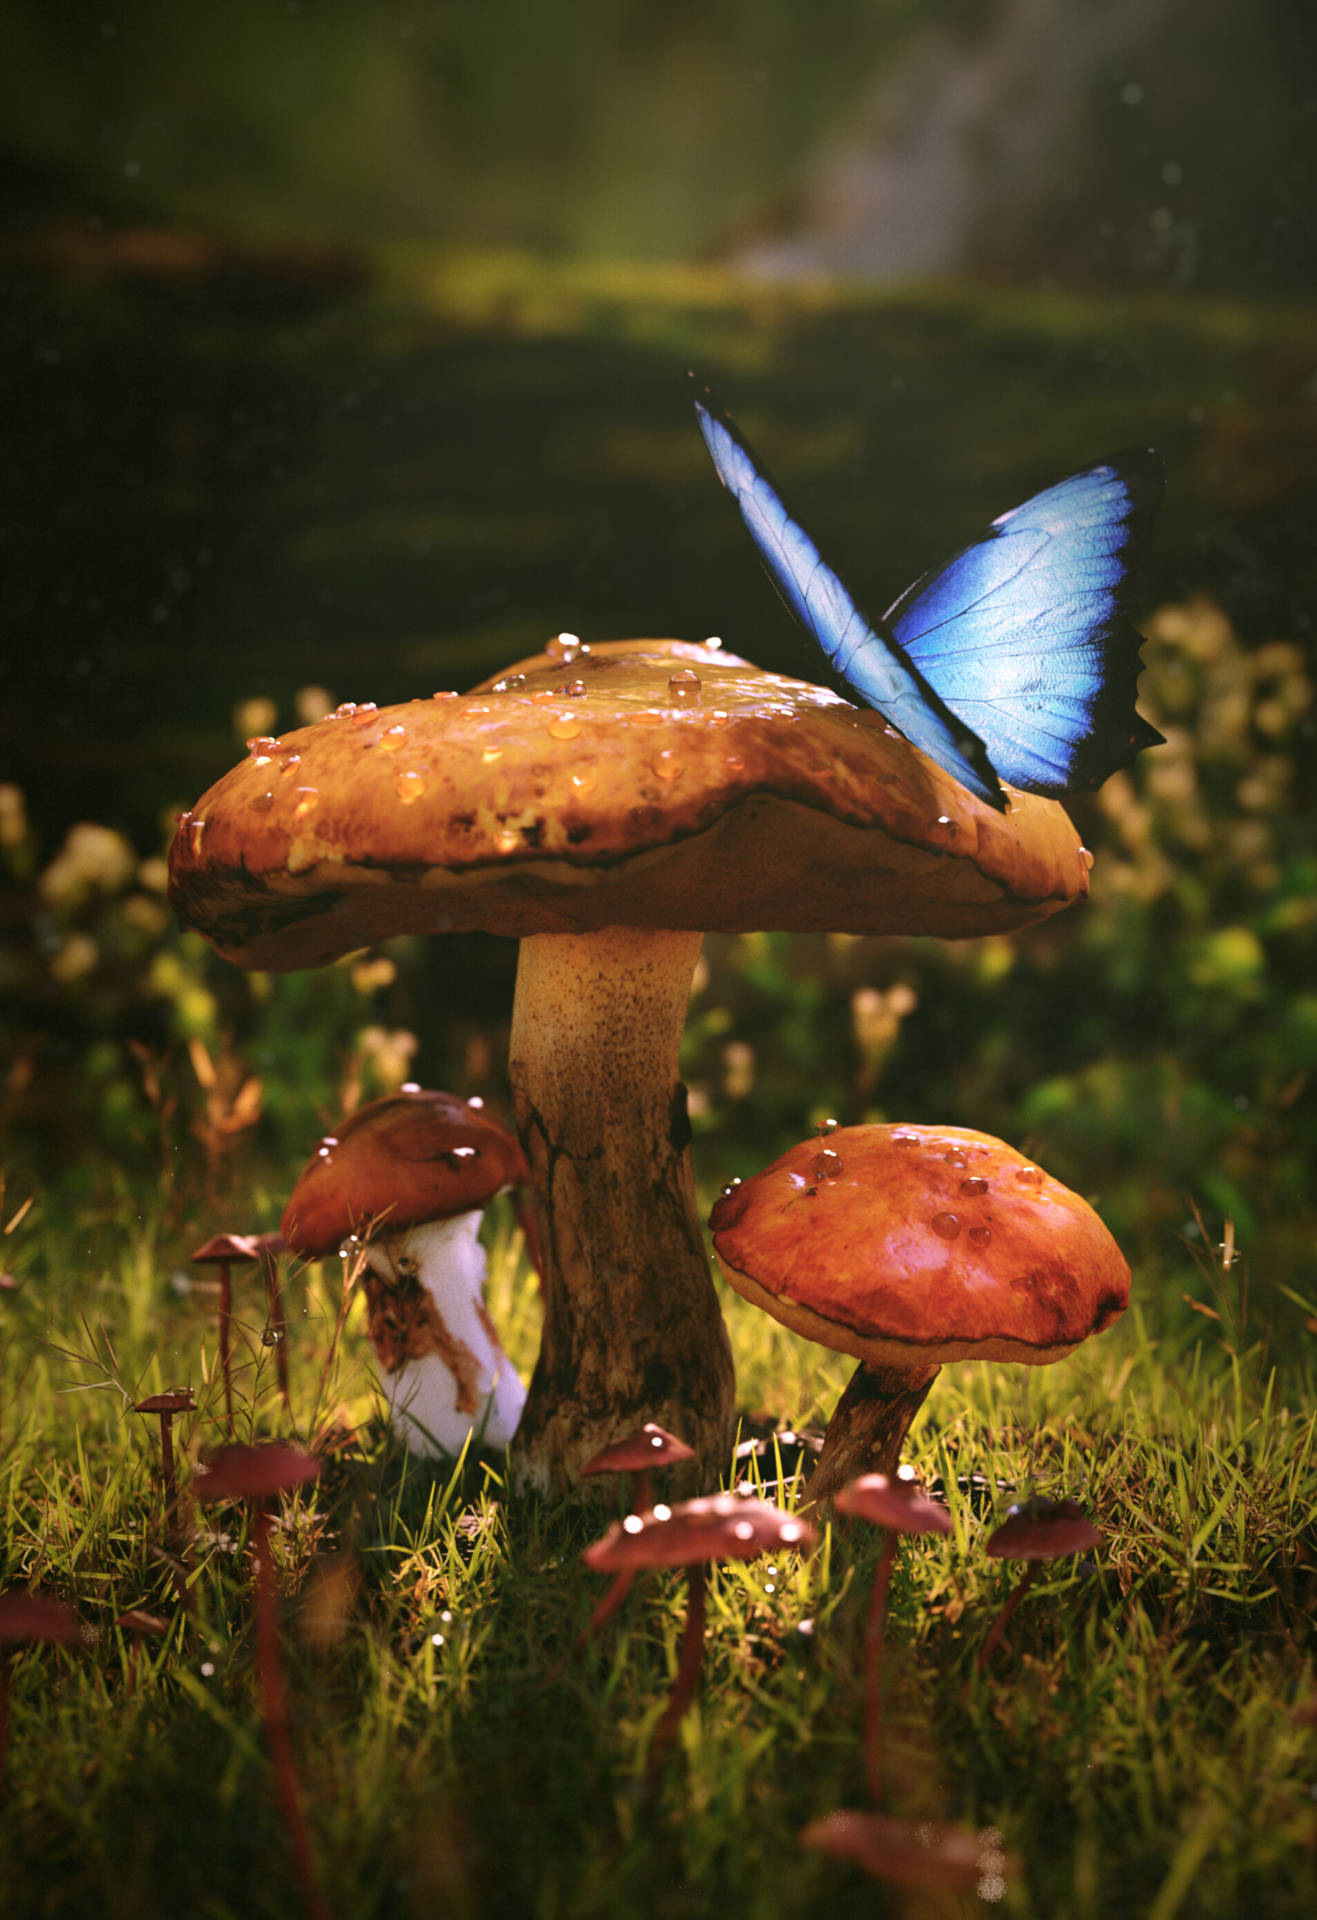 Mushroom And Butterfly